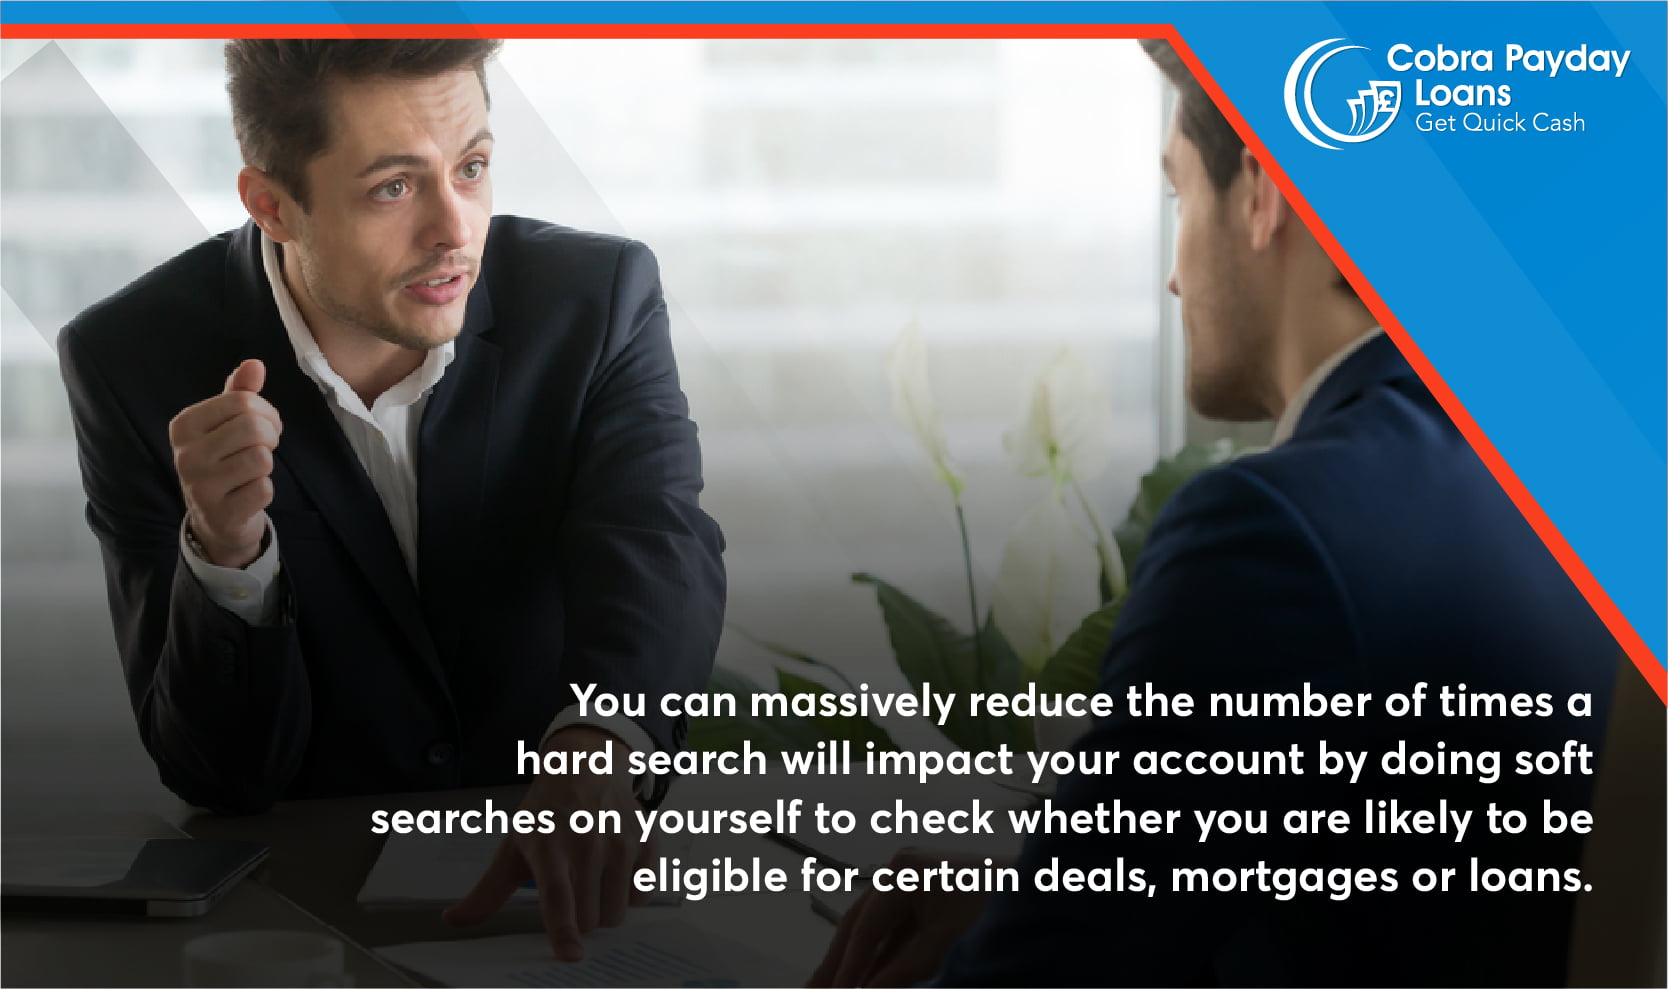 You can massively reduce the number of times a hard search will impact your account by doing soft searches on yourself to check whether you are likely to be eligible for certain deals, mortgages or loans